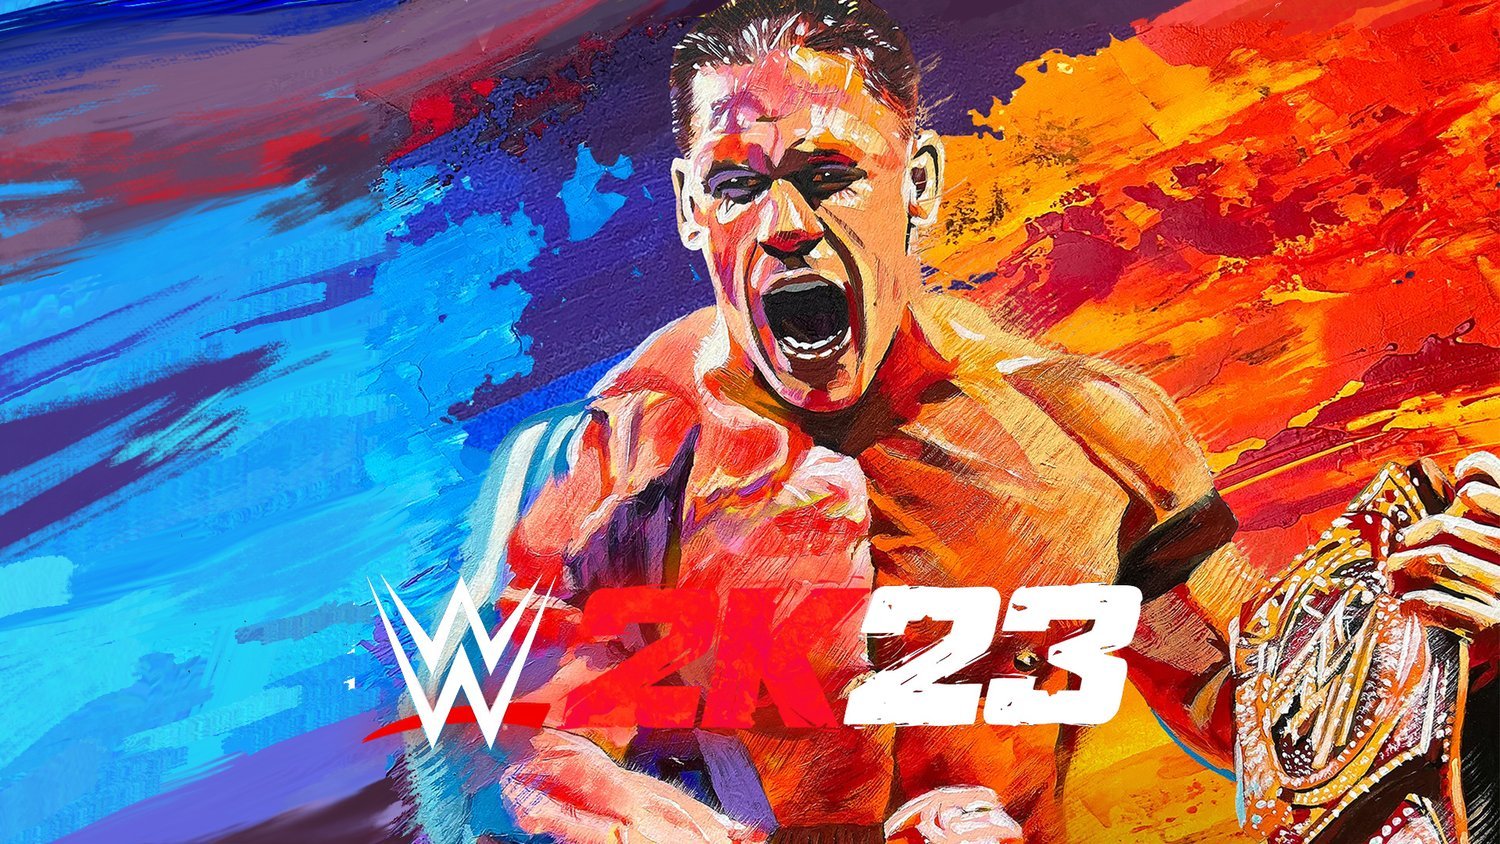 WWE 2K23 Review (PS5) - Didn't Give Up - Finger Guns